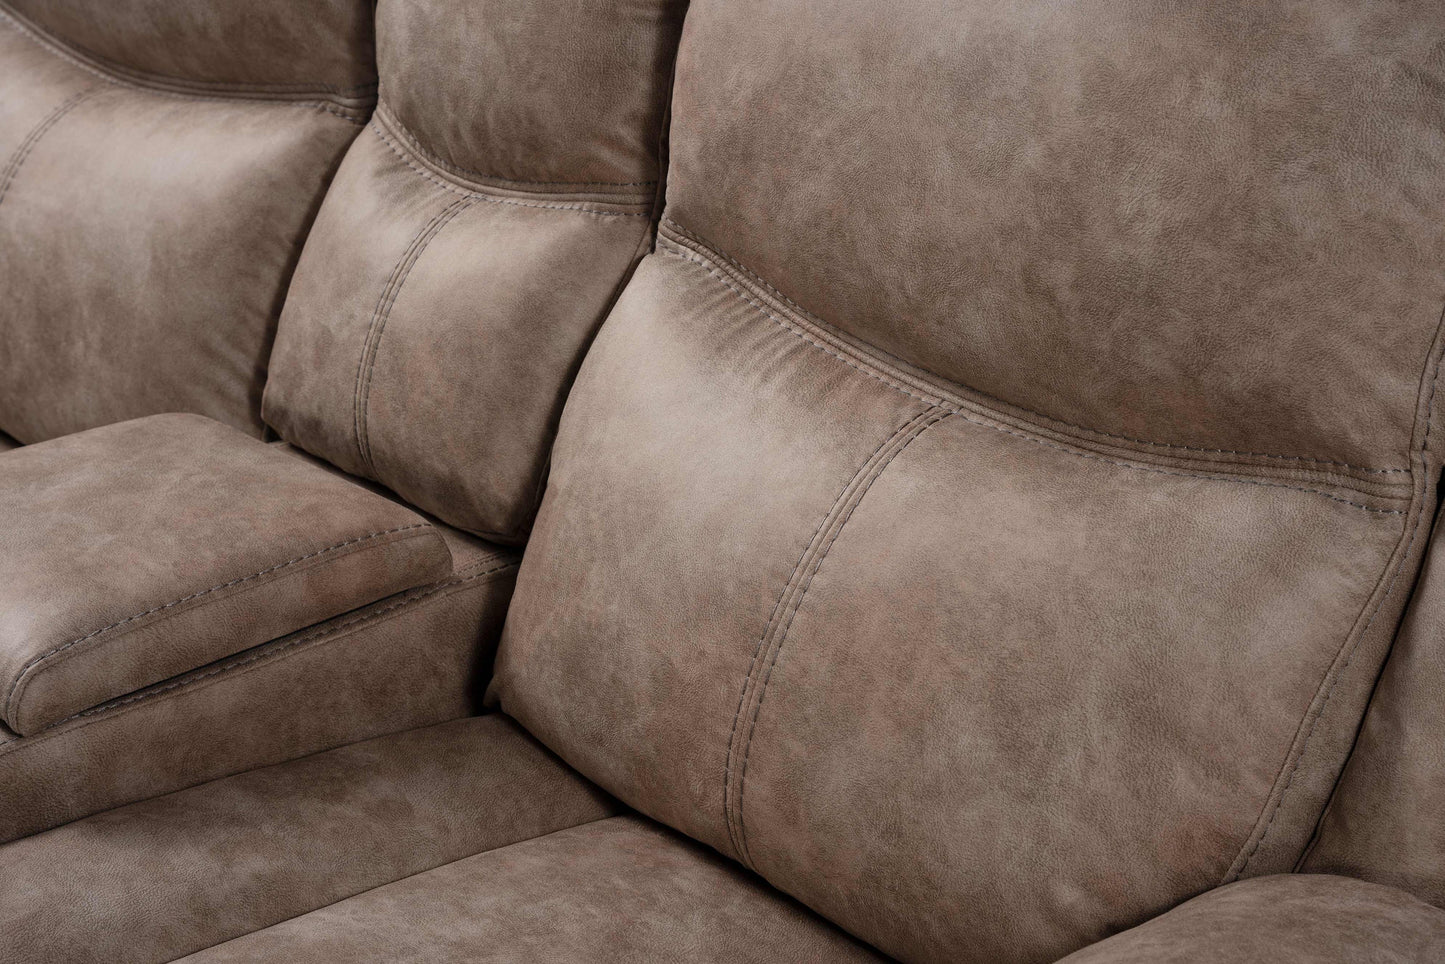 Ensley Faux Leather 3-Piece Reclining Living Room Collection, Sand